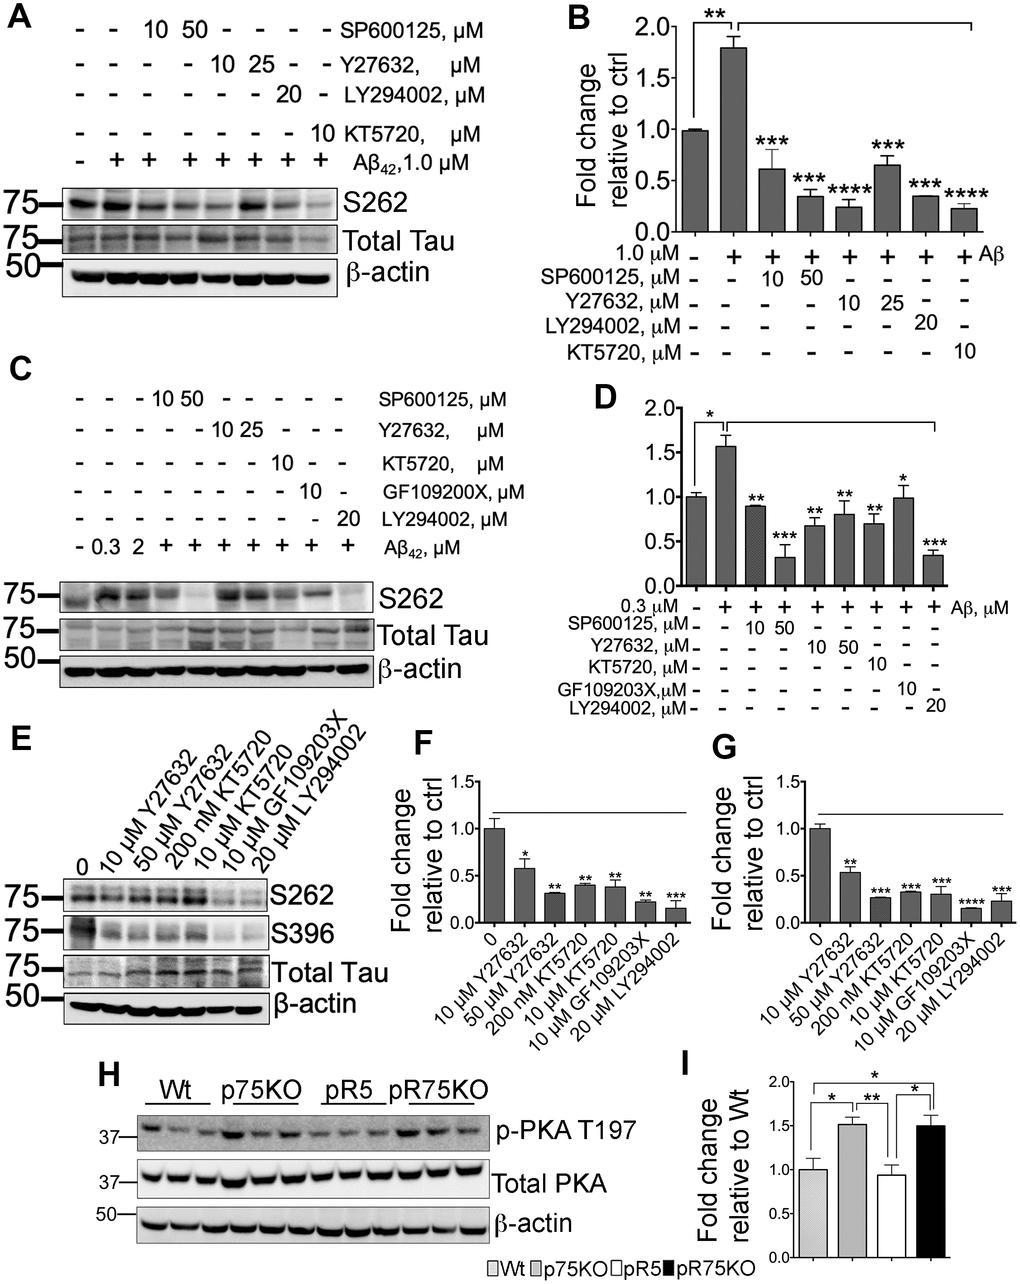 Various kinase inhibitors attenuated Tau hyperphosphorylation of neurons in vitro. (A) Protein blot of phosphorylated human Tau at sites S262 in SH-SY5Y-APP cell line treated with or without Aβ42 (1 μM), and subsequently treated with several kinase inhibitors for JNK (SP600125, 10 and 50 μM), ROCK (Y27632, 10 and 25 μM), PI3K (LY294002, 20 μM), and PKA (KT5720, 10 μM) in the presence of Aβ42 for 24 hours. (B) Protein band intensity quantification of phosphorylated human Tau at site S262 levels in SH-SY5Y-APP cell line. Data are represented as the mean ± SEM, n=3. (C) Protein blot of phosphorylated human Tau at sites S262 in primary cortical neurons from pR5 mice treated with or without with Aβ42 (0.3 and 2 μM), and subsequently treated with inhibitors for JNK (SP600125, 10 and 50 μM), ROCK (Y27632, 10 and 25 μM), PKA (KT5720, 10 μM), PKC (GF109203X, 10 μM) and PI3K (LY294002, 20 μM) in the presence ofAβ42 (0.3 μM). (D) Protein band intensity quantification of phosphorylated human Tau at site S262 levels in primary cortical neurons from pR5 mice normalized with total human Tau and expressed as fold change relative to non-treated control (0). Data are represented as the mean ± SEM. Experiment was done in 3 replicates, each replicate has n=12 animals. (E) Protein blot of phosphorylated human Tau at sites S262 and S396 in primary cortical neurons from pR5 mice treated with inhibitors for ROCK (Y27632, 10 and 50 μM), PKA (KT5720, 200 nM and 10 μM), PKC (GF109203X, 10 μM) and PI3K (LY294002, 20 μM). Protein band intensity quantification of phosphorylated human Tau at sites S262 (F) and S396 (G) in primary cortical neurons from pR5 mice normalized with total human Tau and expressed as fold change relative to non-treated control (0) Data are represented as the mean ± SEM. Experiment was done in 3 replicates, each replicate has n=12 animals. (H) Protein blot of PKA phosphorylated at site T197 and total PKA in 6 month old mice. (I) Protein band intensity quantification of phosphorylated PKA at site T197 normalized with total PKA and expressed as fold change relative to Wt mice. Data are represented as the mean ± SEM, n=6. Statistical comparisons were performed using one-way ANOVA and Tukey’s test. Statistical significance: *P, ***P.